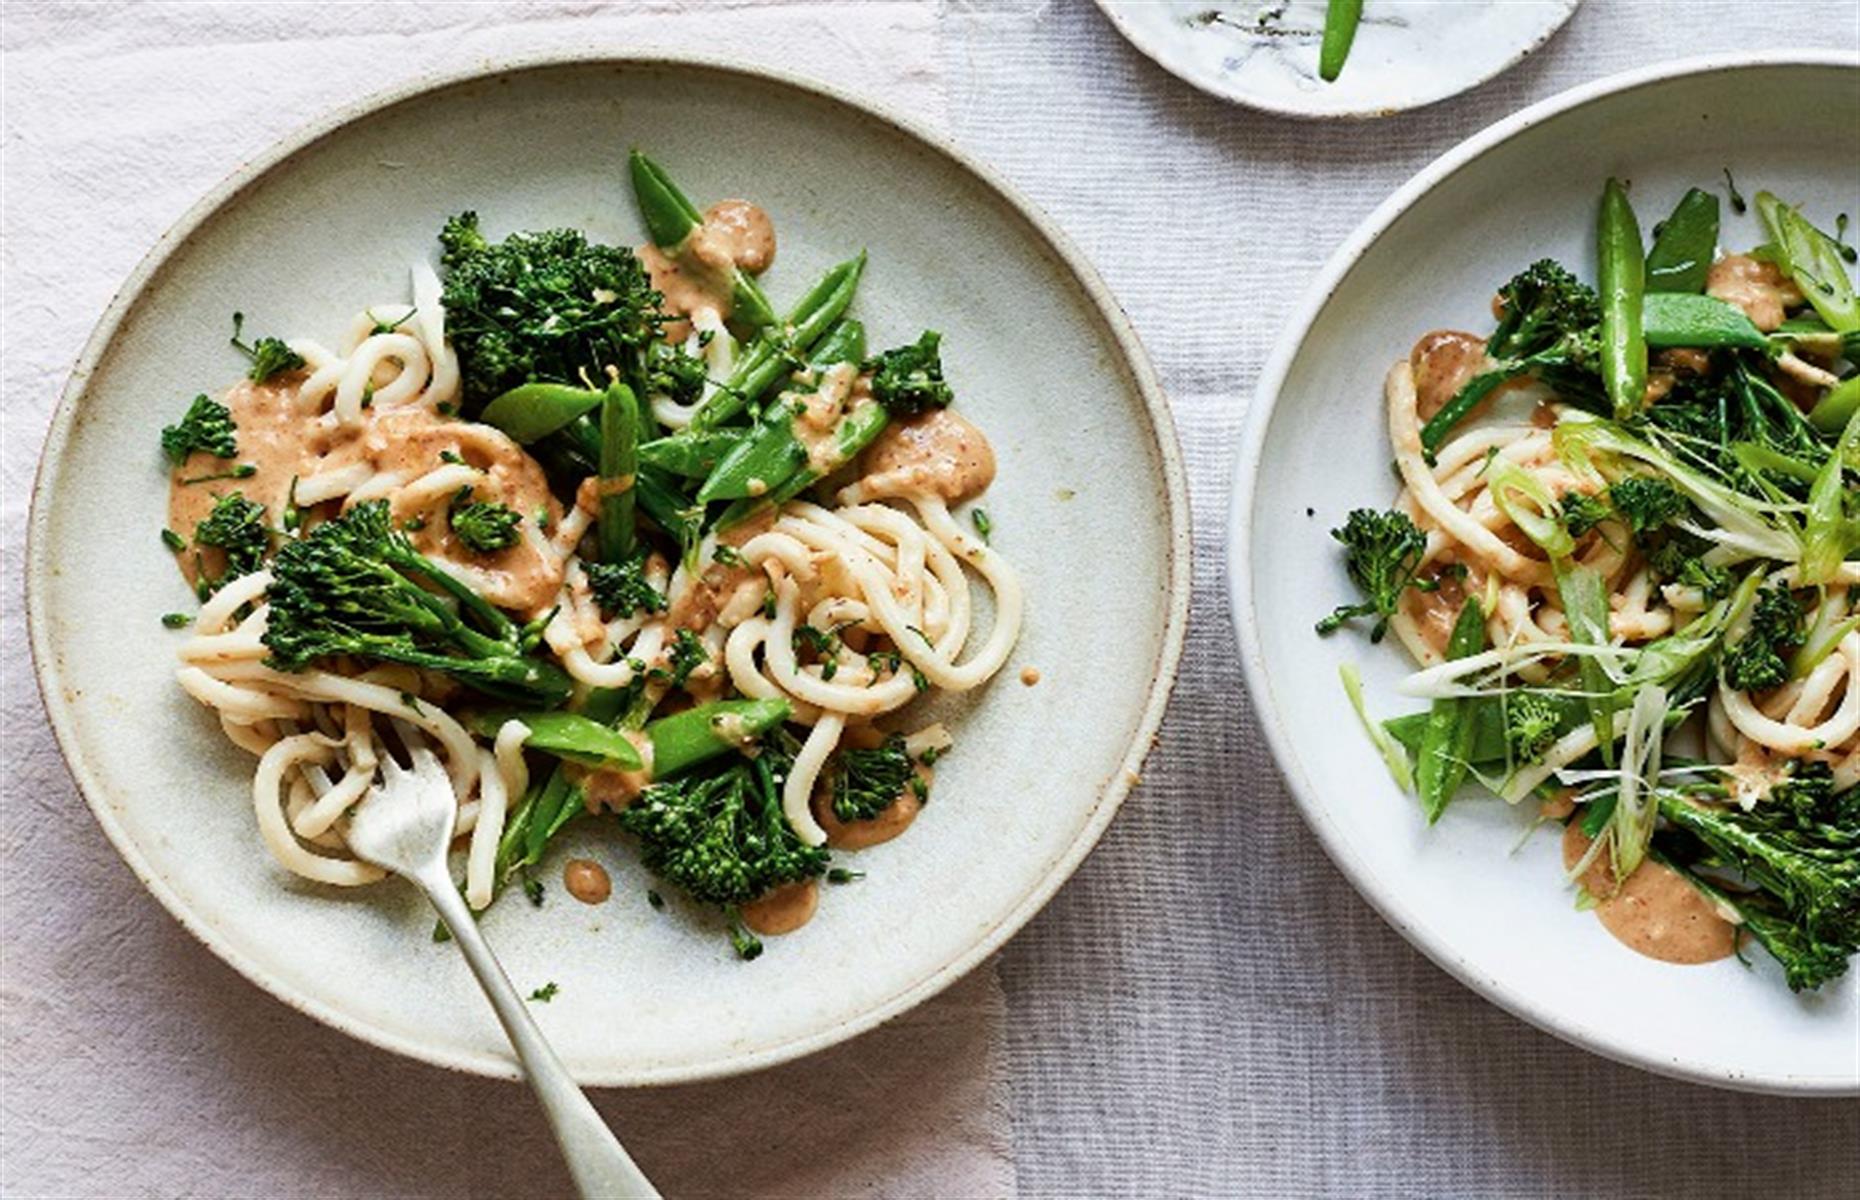 <p>This simple stir-fry is ready in 15 minutes and it's the sauce which is the clever time-saver. Just mix peanut butter with sesame oil, soy sauce and rice vinegar – it's an instant pantry recipe. Add in straight-to-wok udon noodles with green vegetables for a healthy midweek meal.</p>  <p><a href="https://www.lovefood.com/recipes/88607/donal-skehan-vegan-satay-noodle-stirfry-recipe"><strong>Get the recipe for satay noodle stir-fry here</strong></a></p>